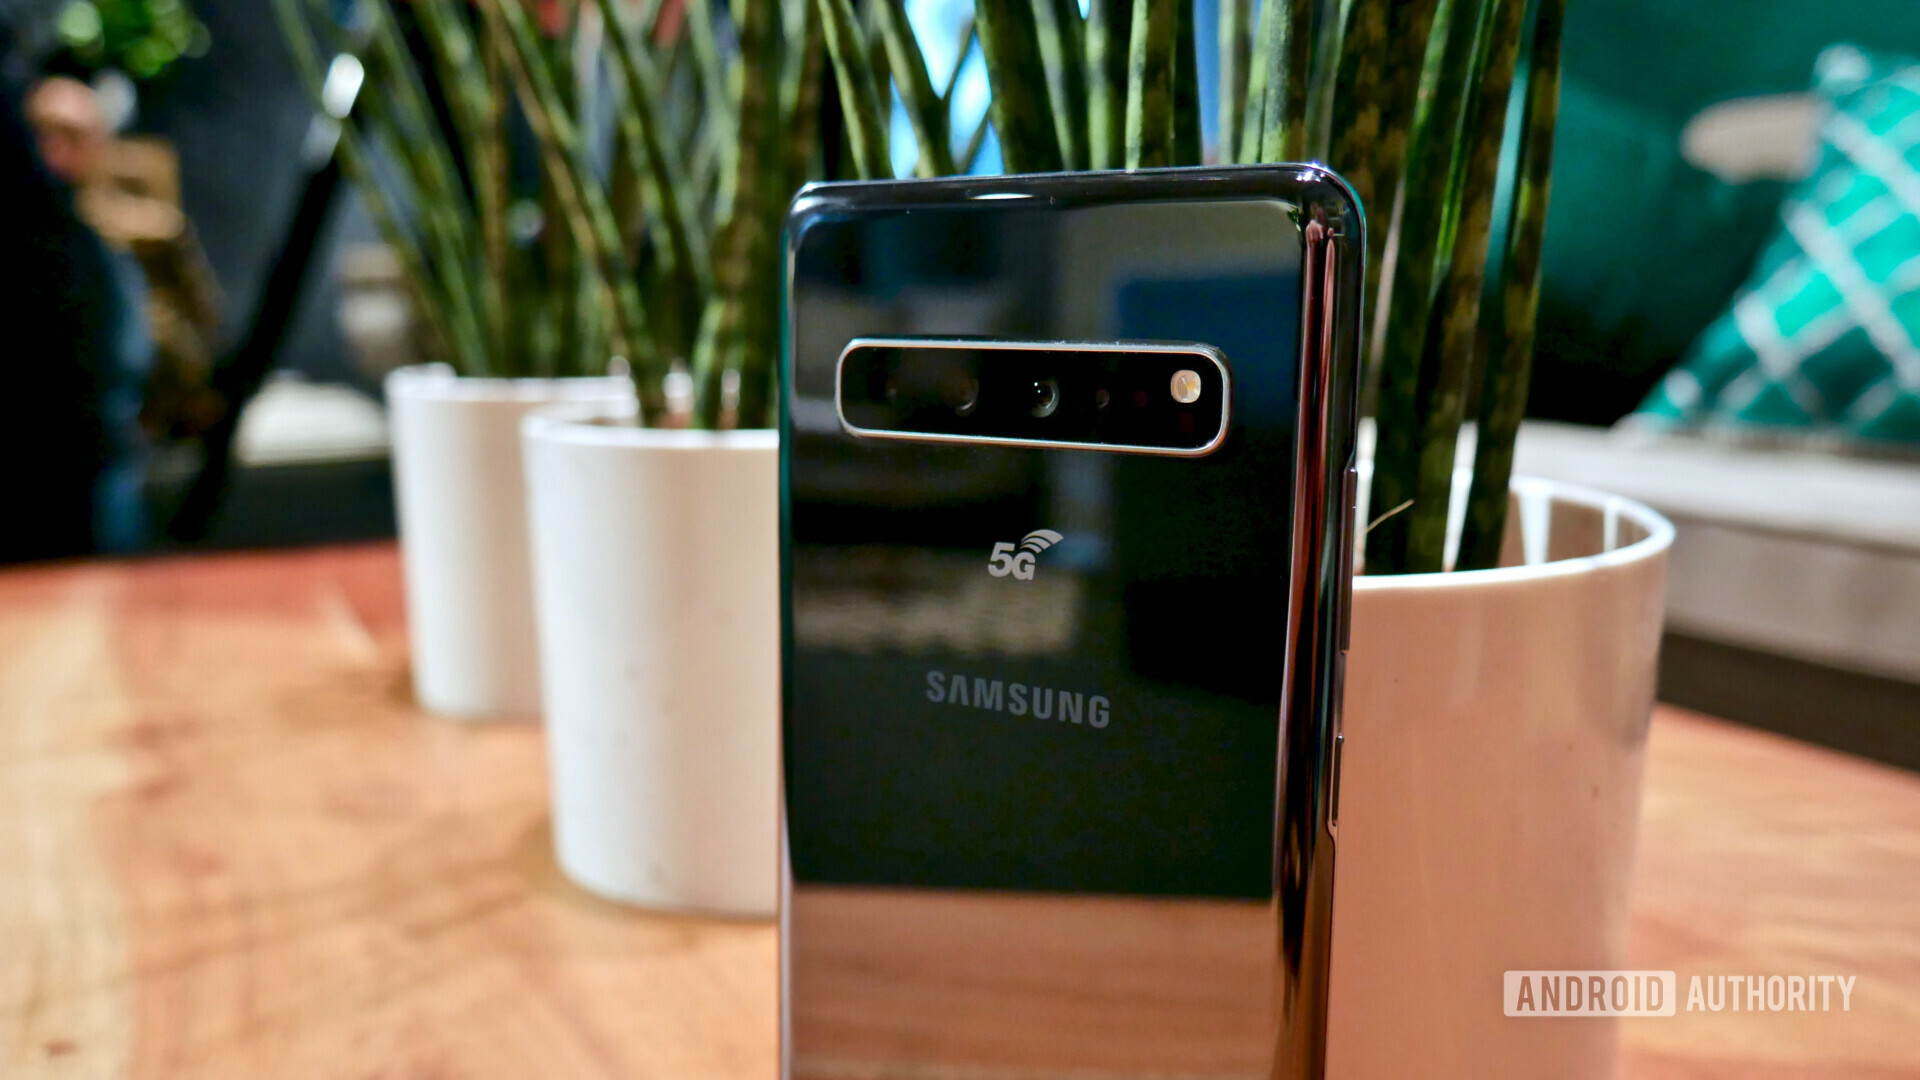 Backside photo of the Samsung Galaxy S10 5G focusing on the tripple cameras with plants in the background.